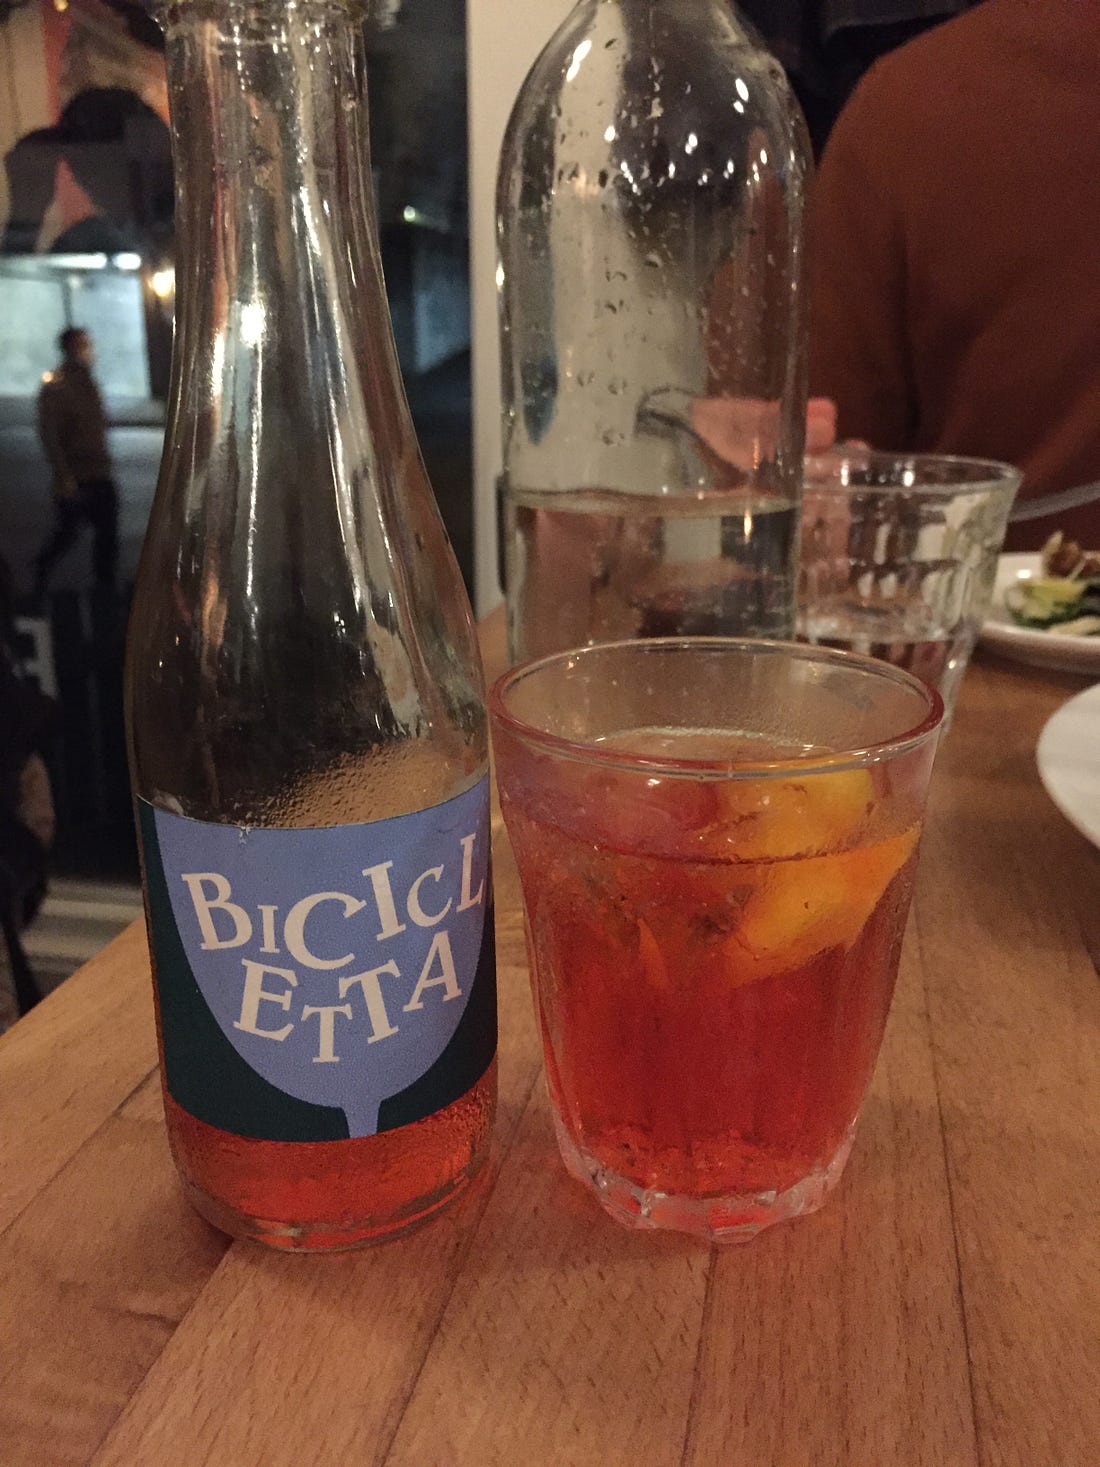 A restaurant table with a small glass full of a pinkish-red cocktail, with a slice of orange rind floating on top. Next to the glass is a small glass bottle with a blue label that reads 'bicicletta' in stylized capital letters. In the background, behind a tall glass bottle of water, Jeff's hand picks up a fork.